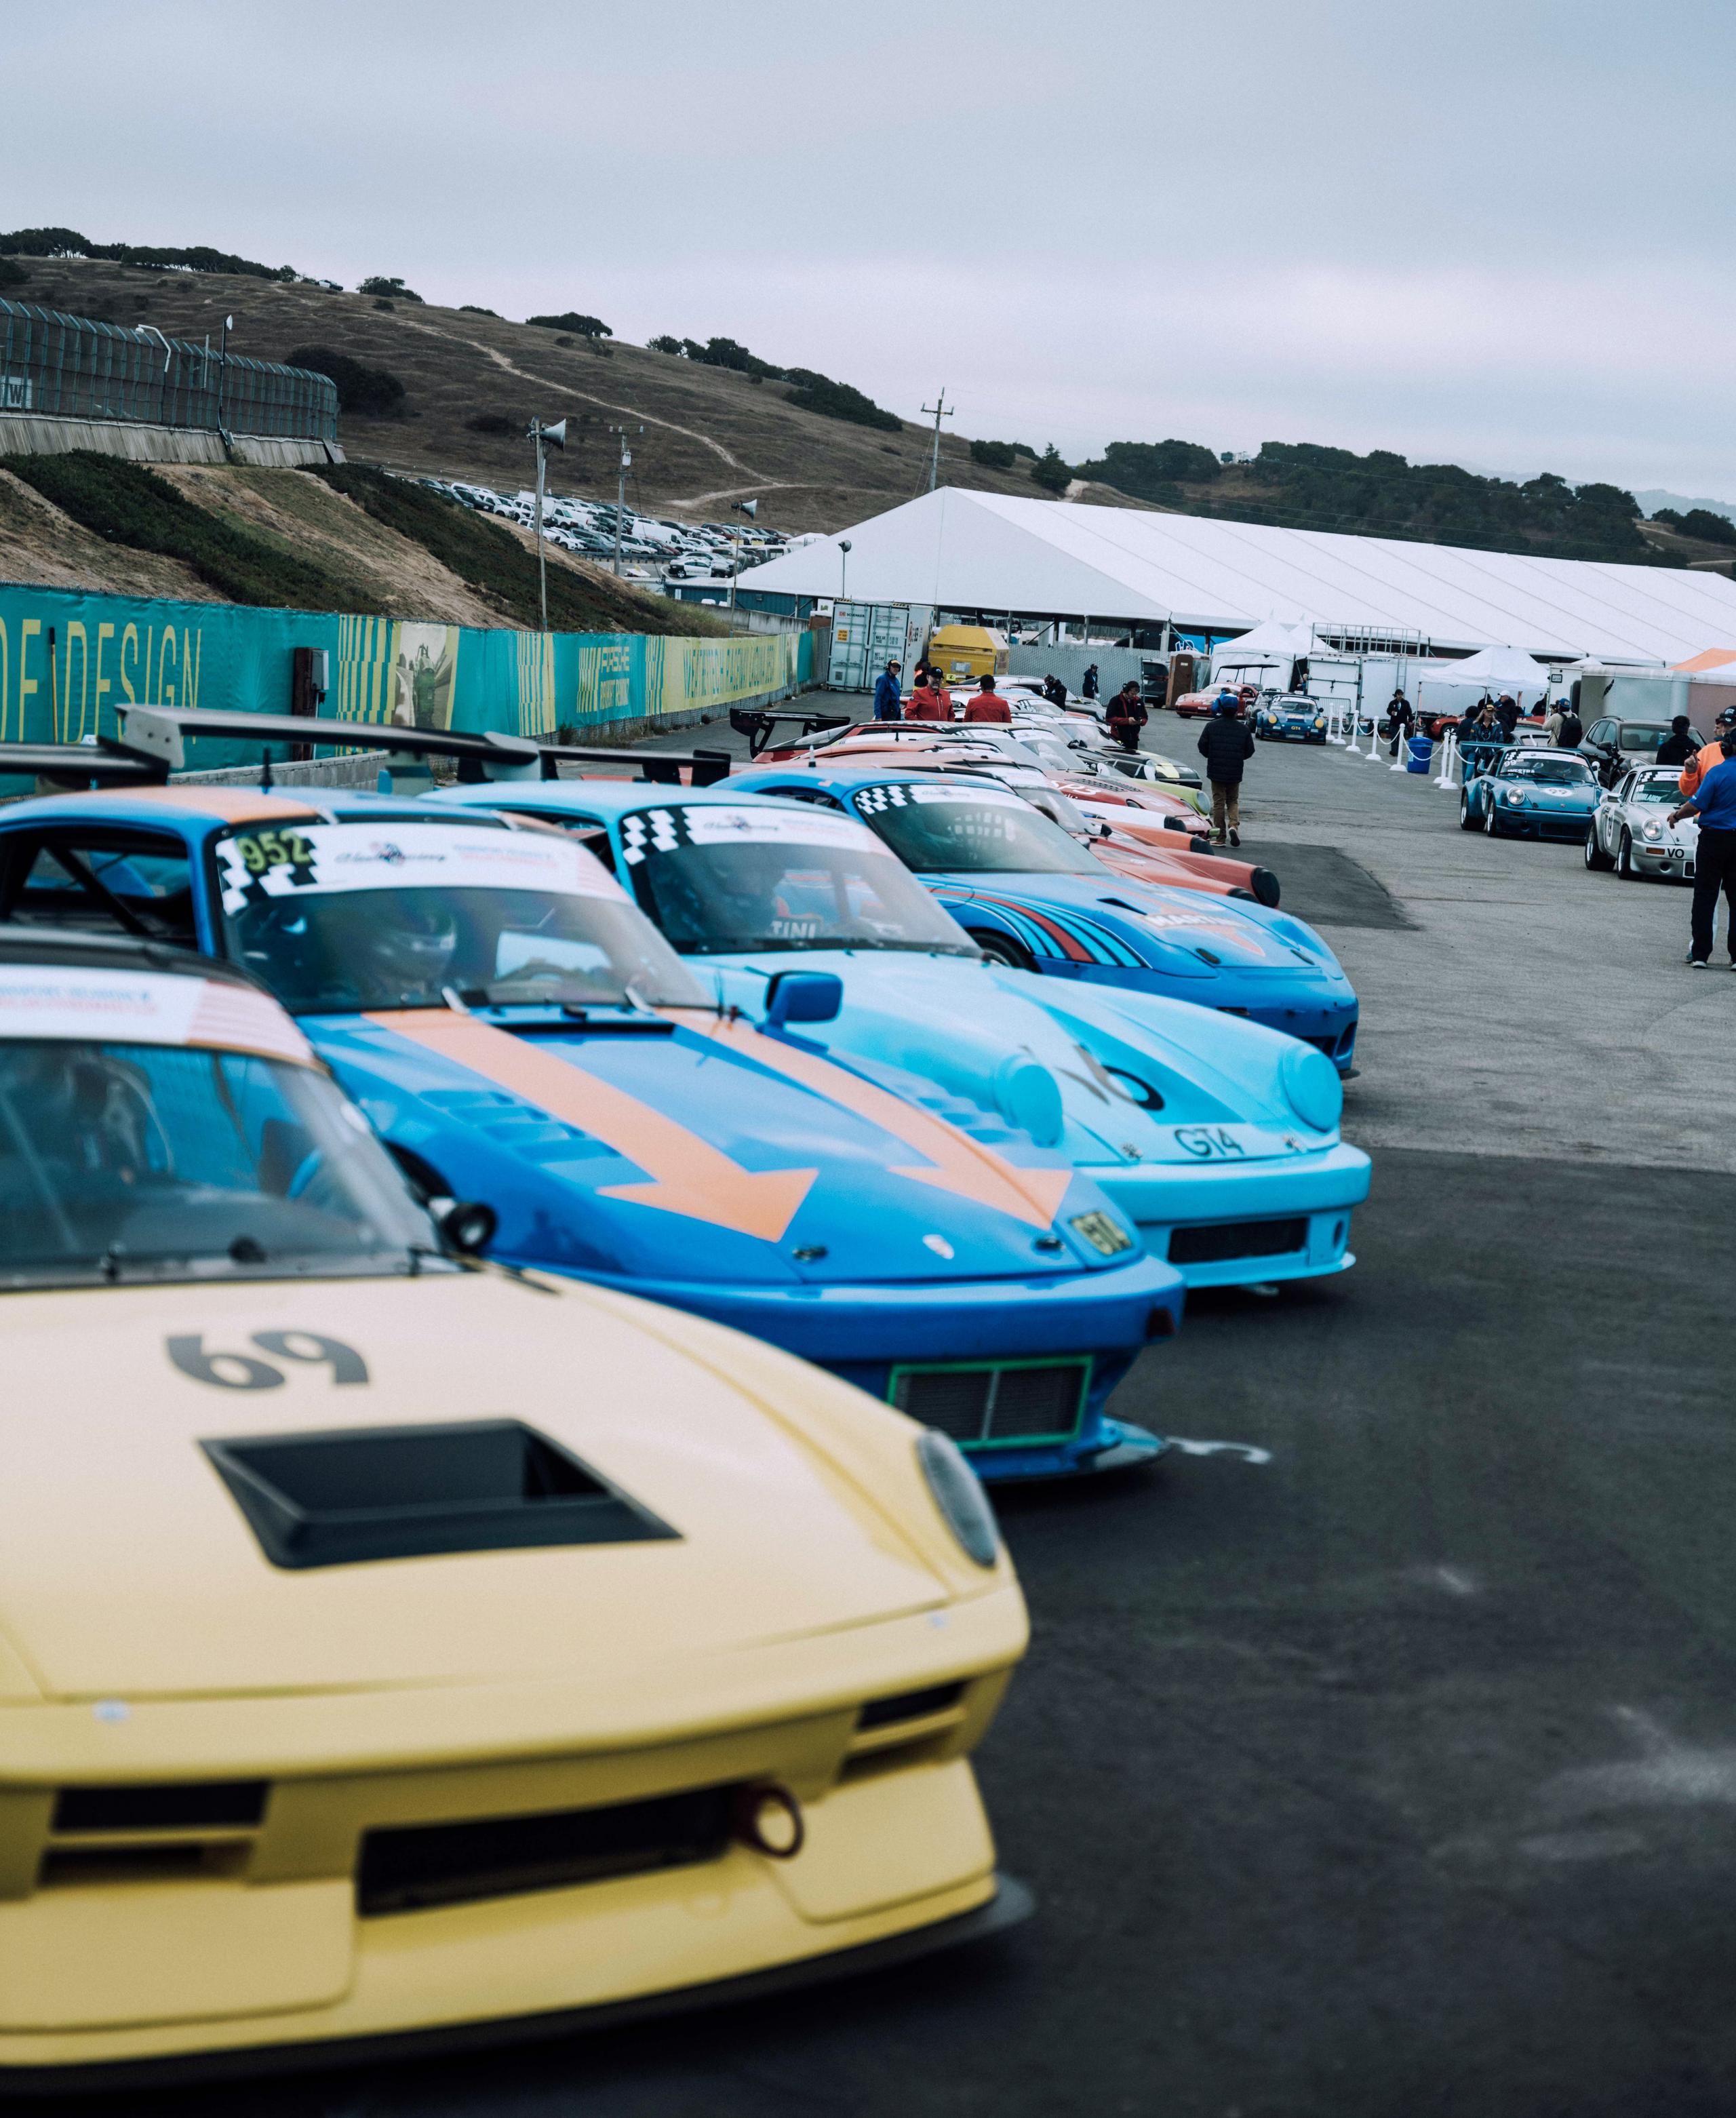 Vintage Porsche's lined up ready for racing